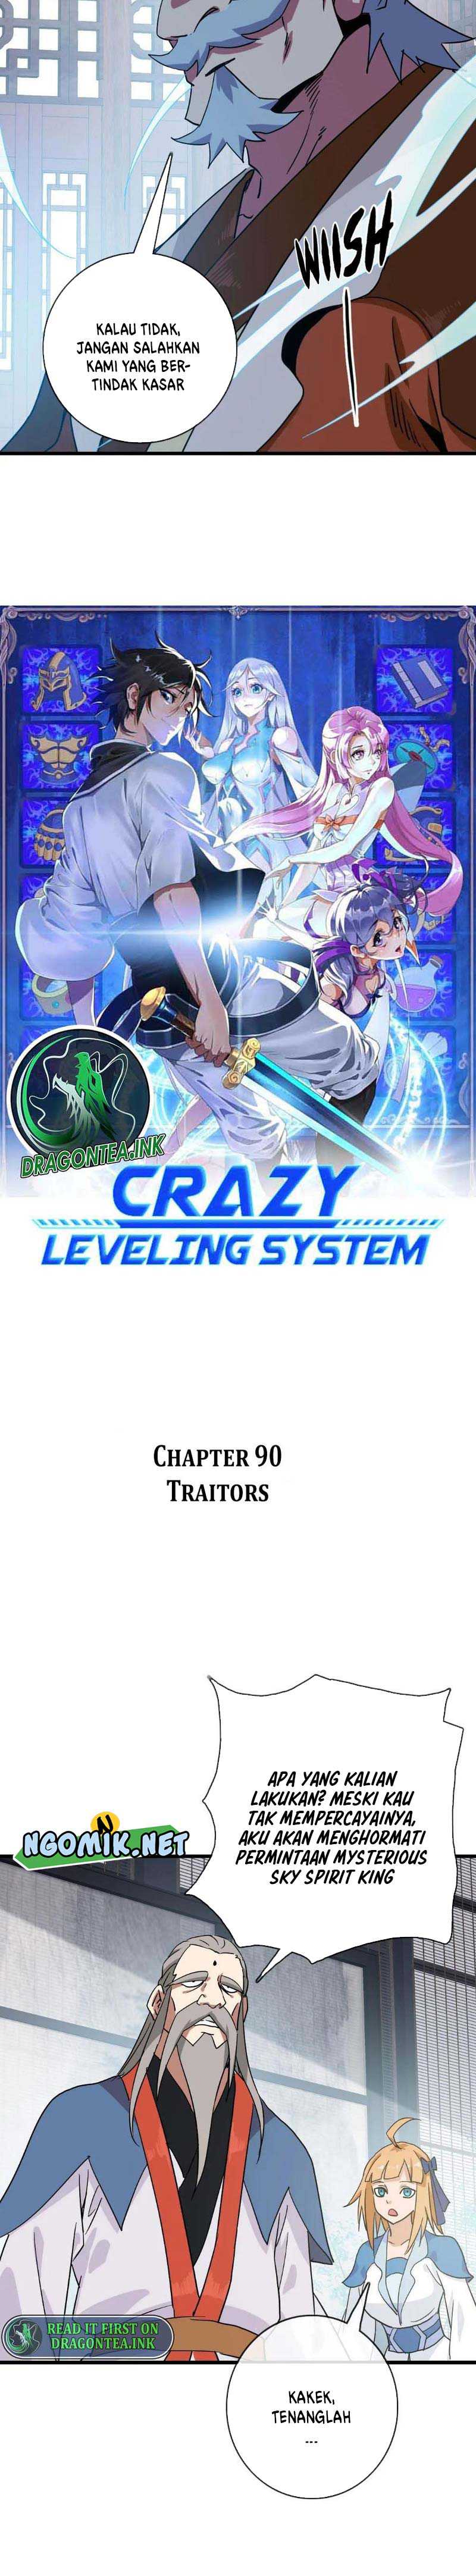 Crazy Leveling System Chapter 90